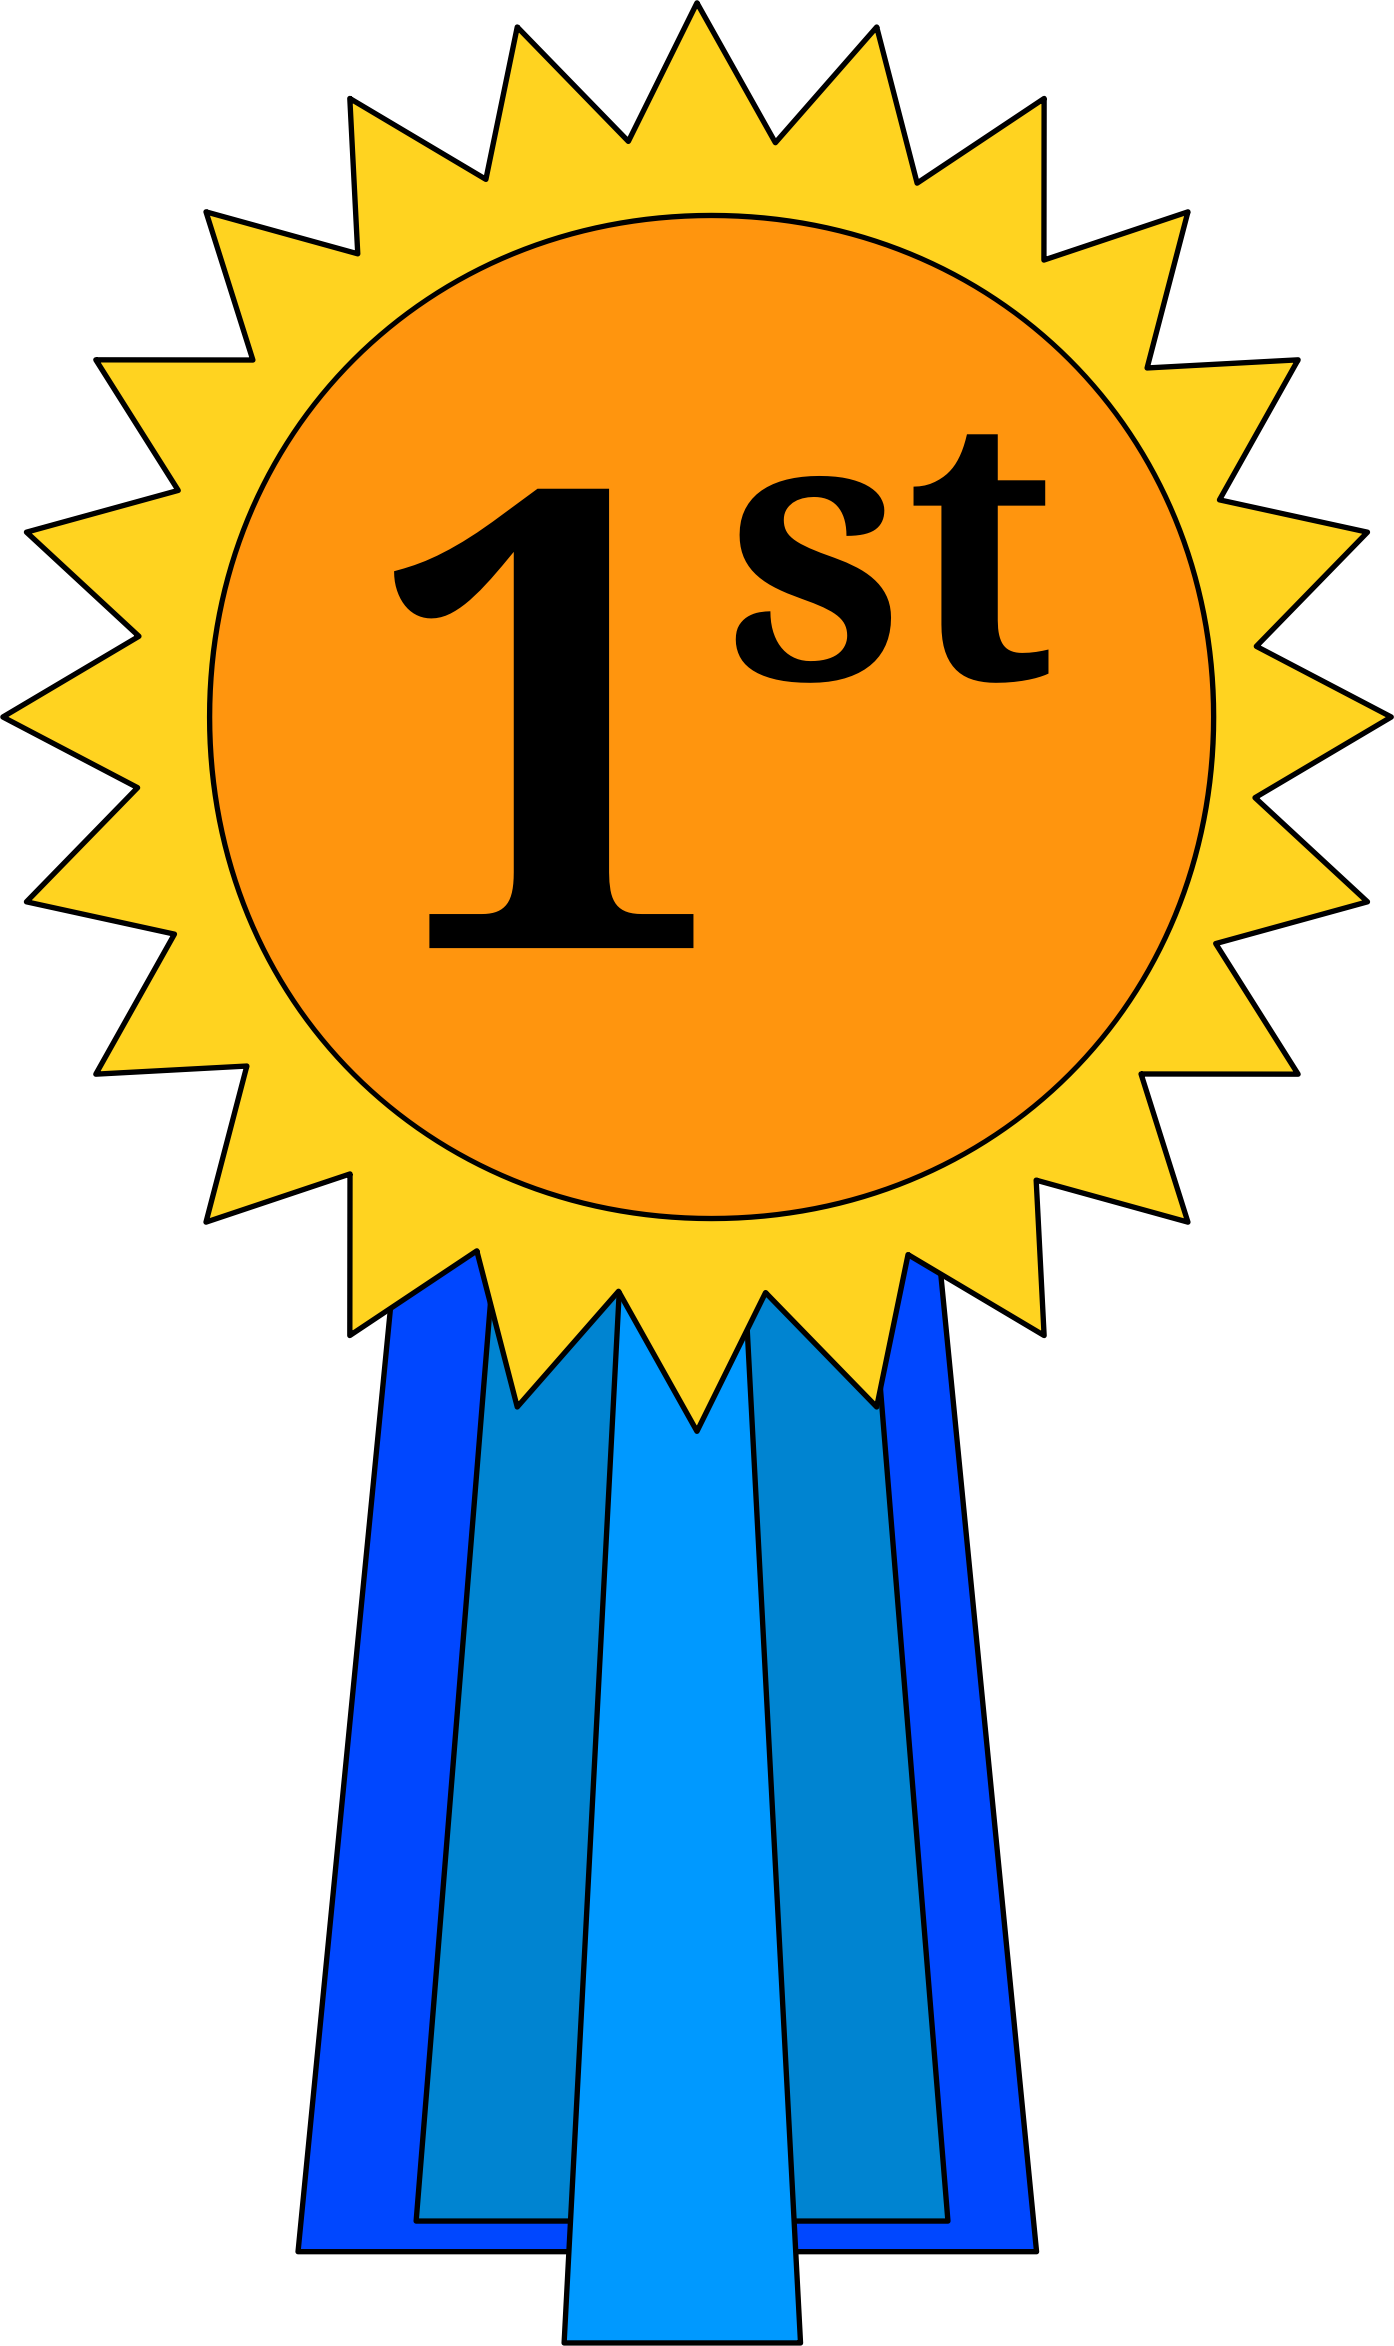 Blue Ribbon First Place PNG HD Image